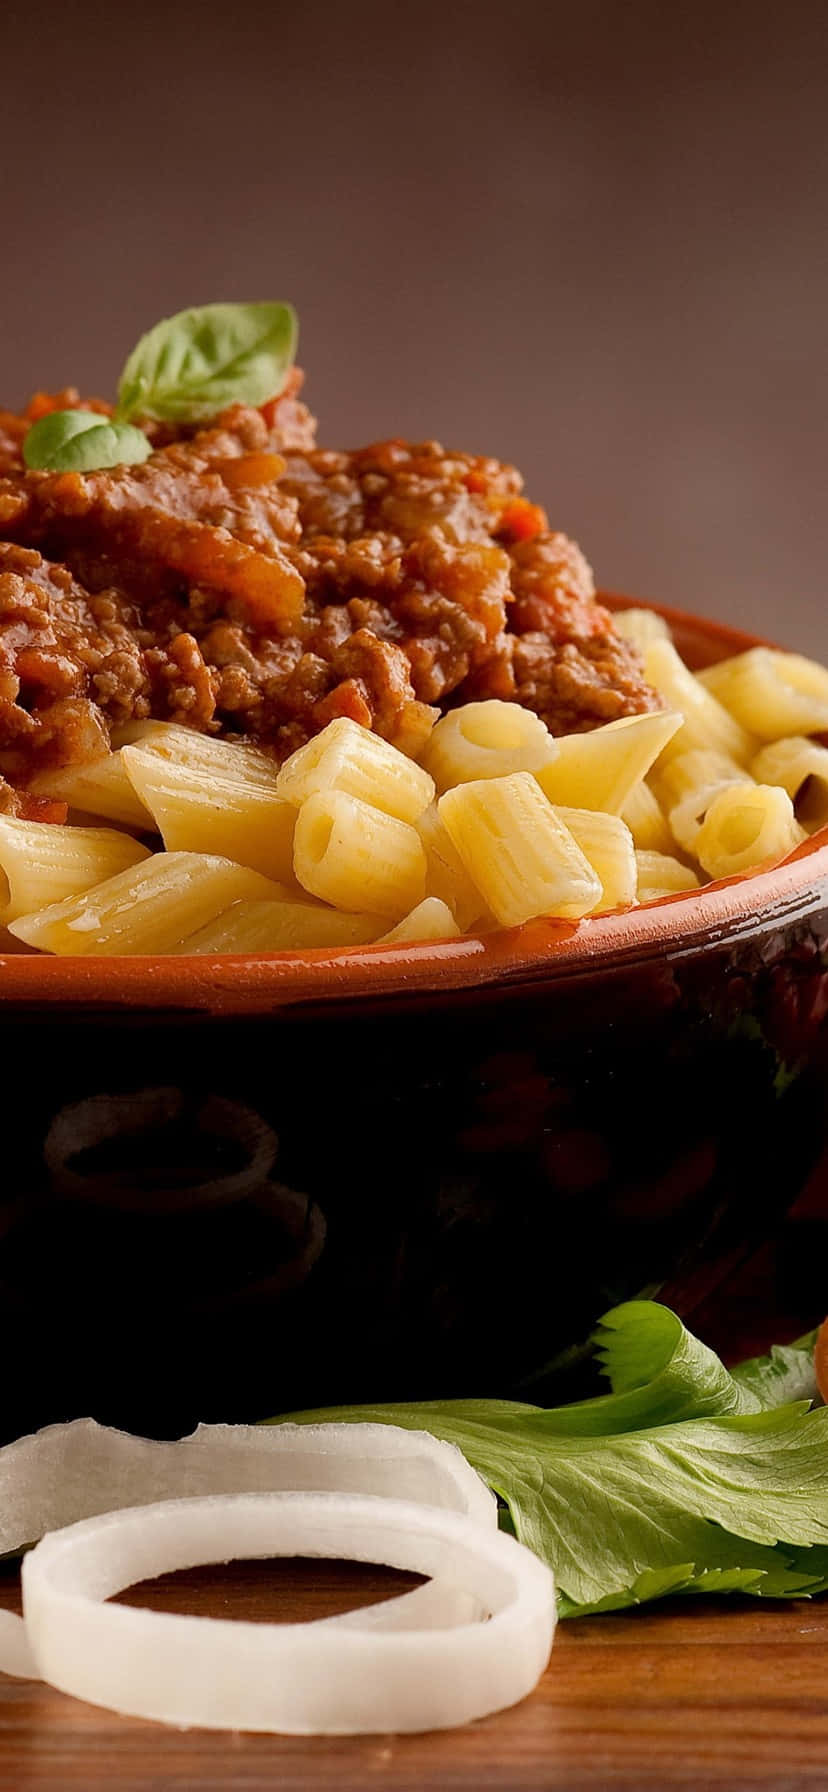 Android Pasta Background Macaroni With Bolognese Sauce